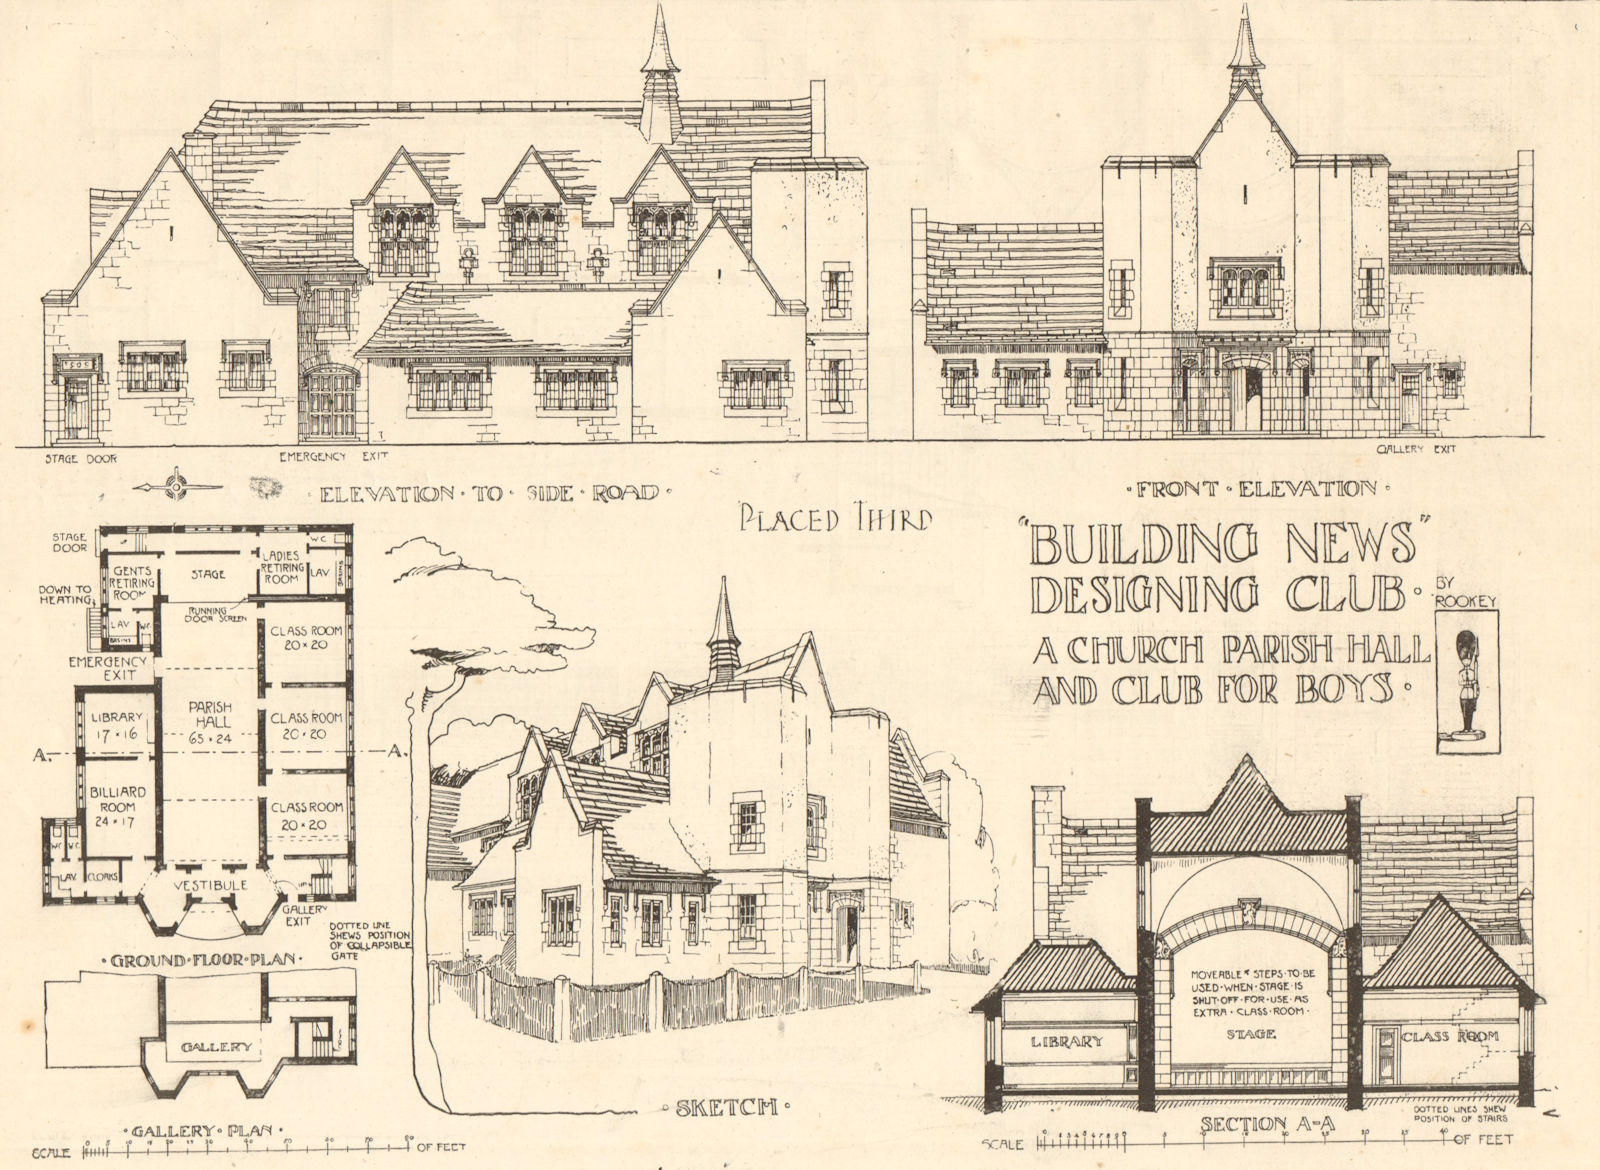 A church parish hall & club for boys. By Rookey. Elevations section plan 1908